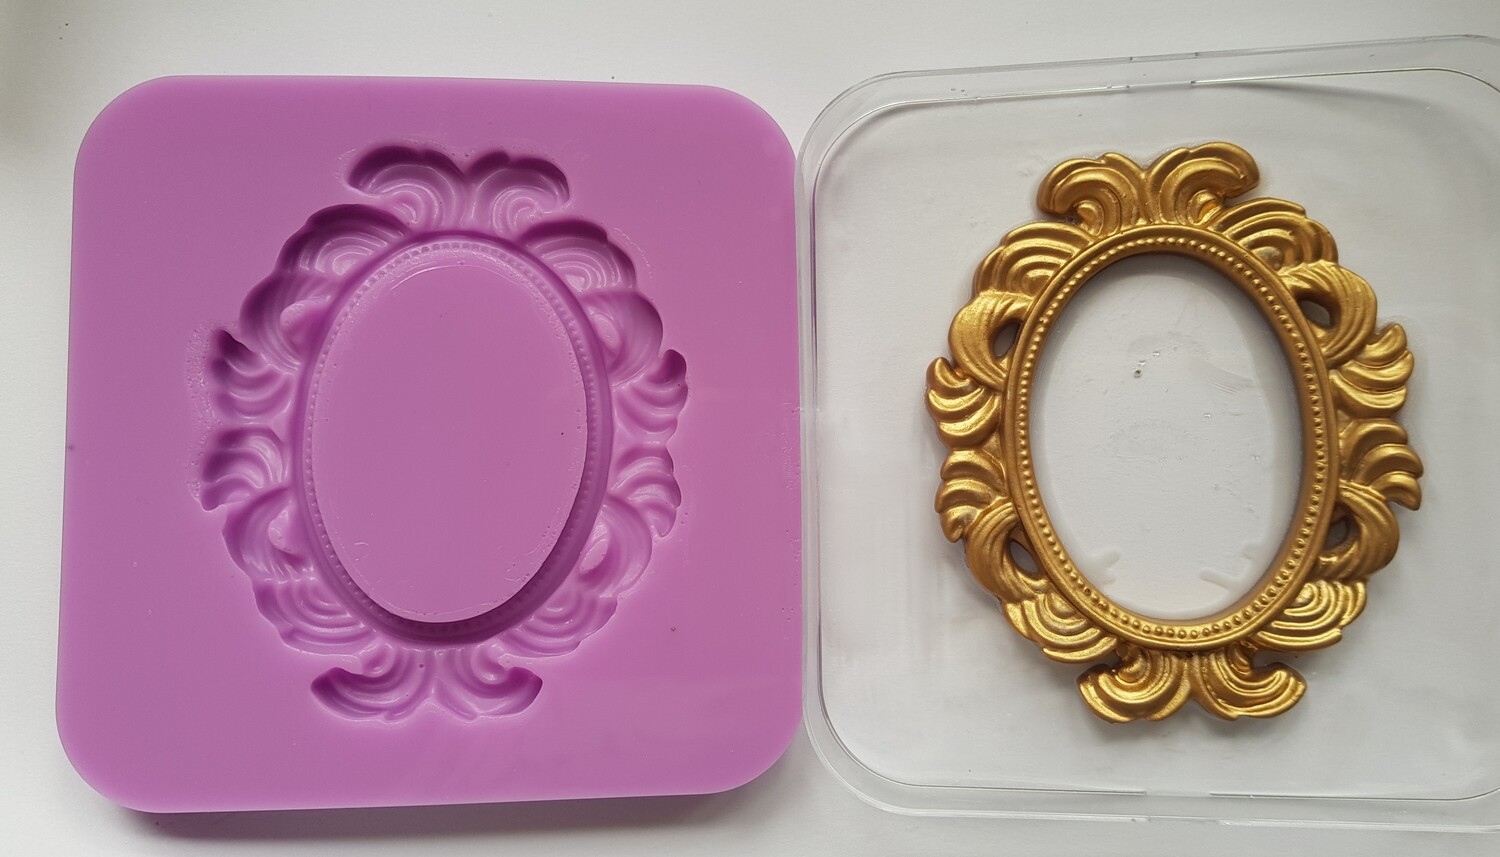 ORNATE OVAL FRAME SILICONE MOULD